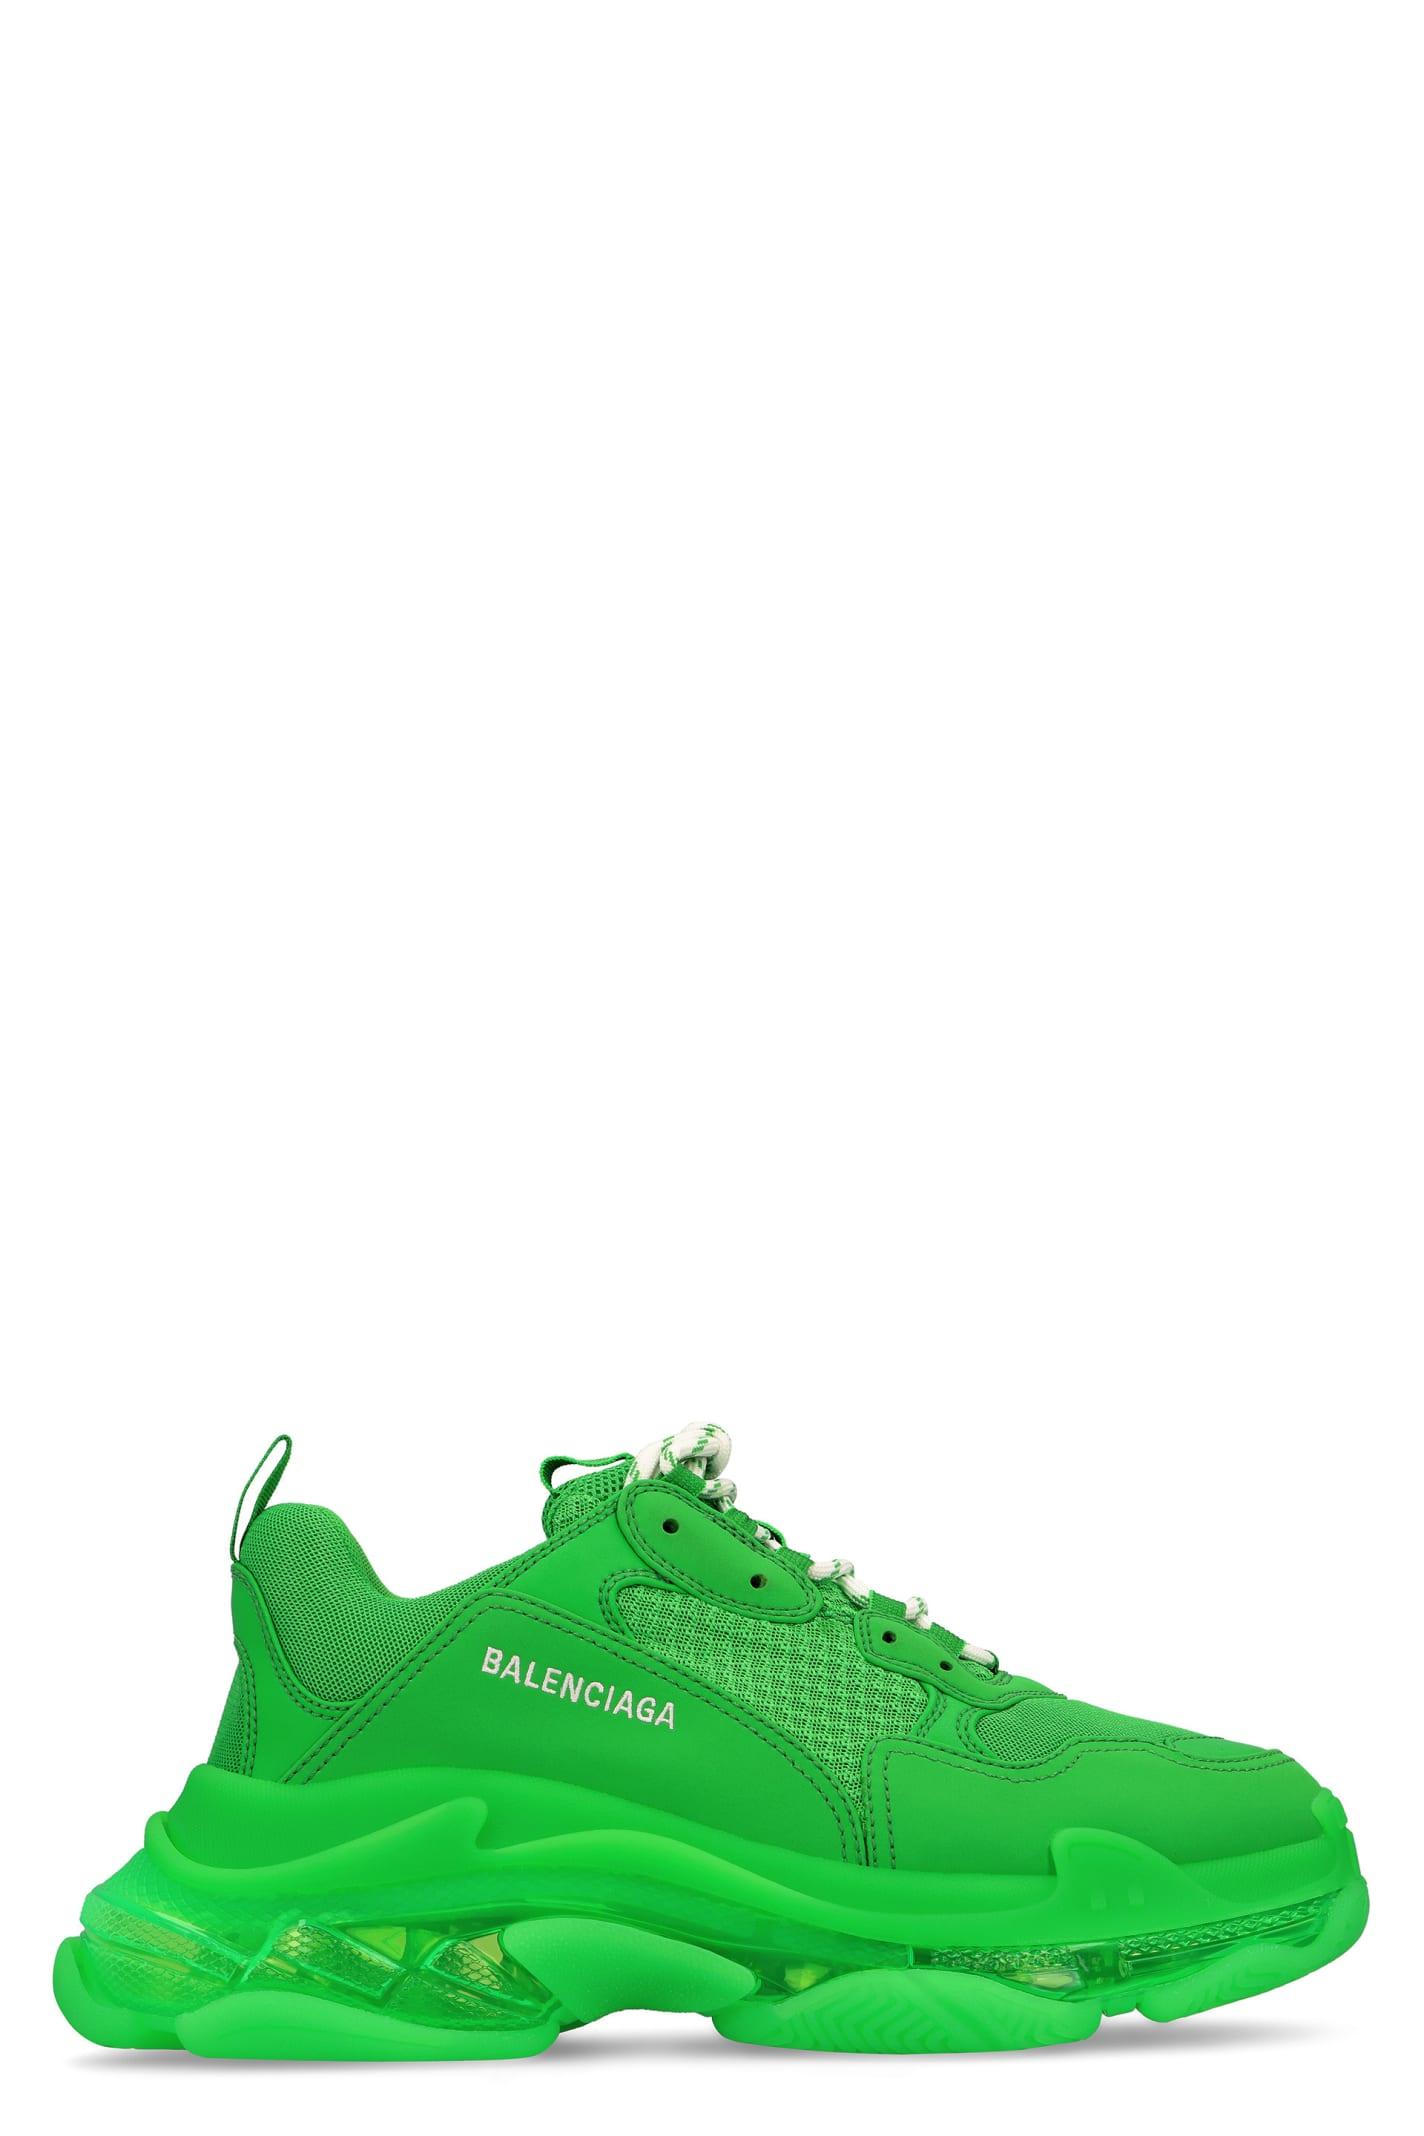 Balenciaga Triple S Clear Sole Chunky Sneakers in Green for Men | Lyst